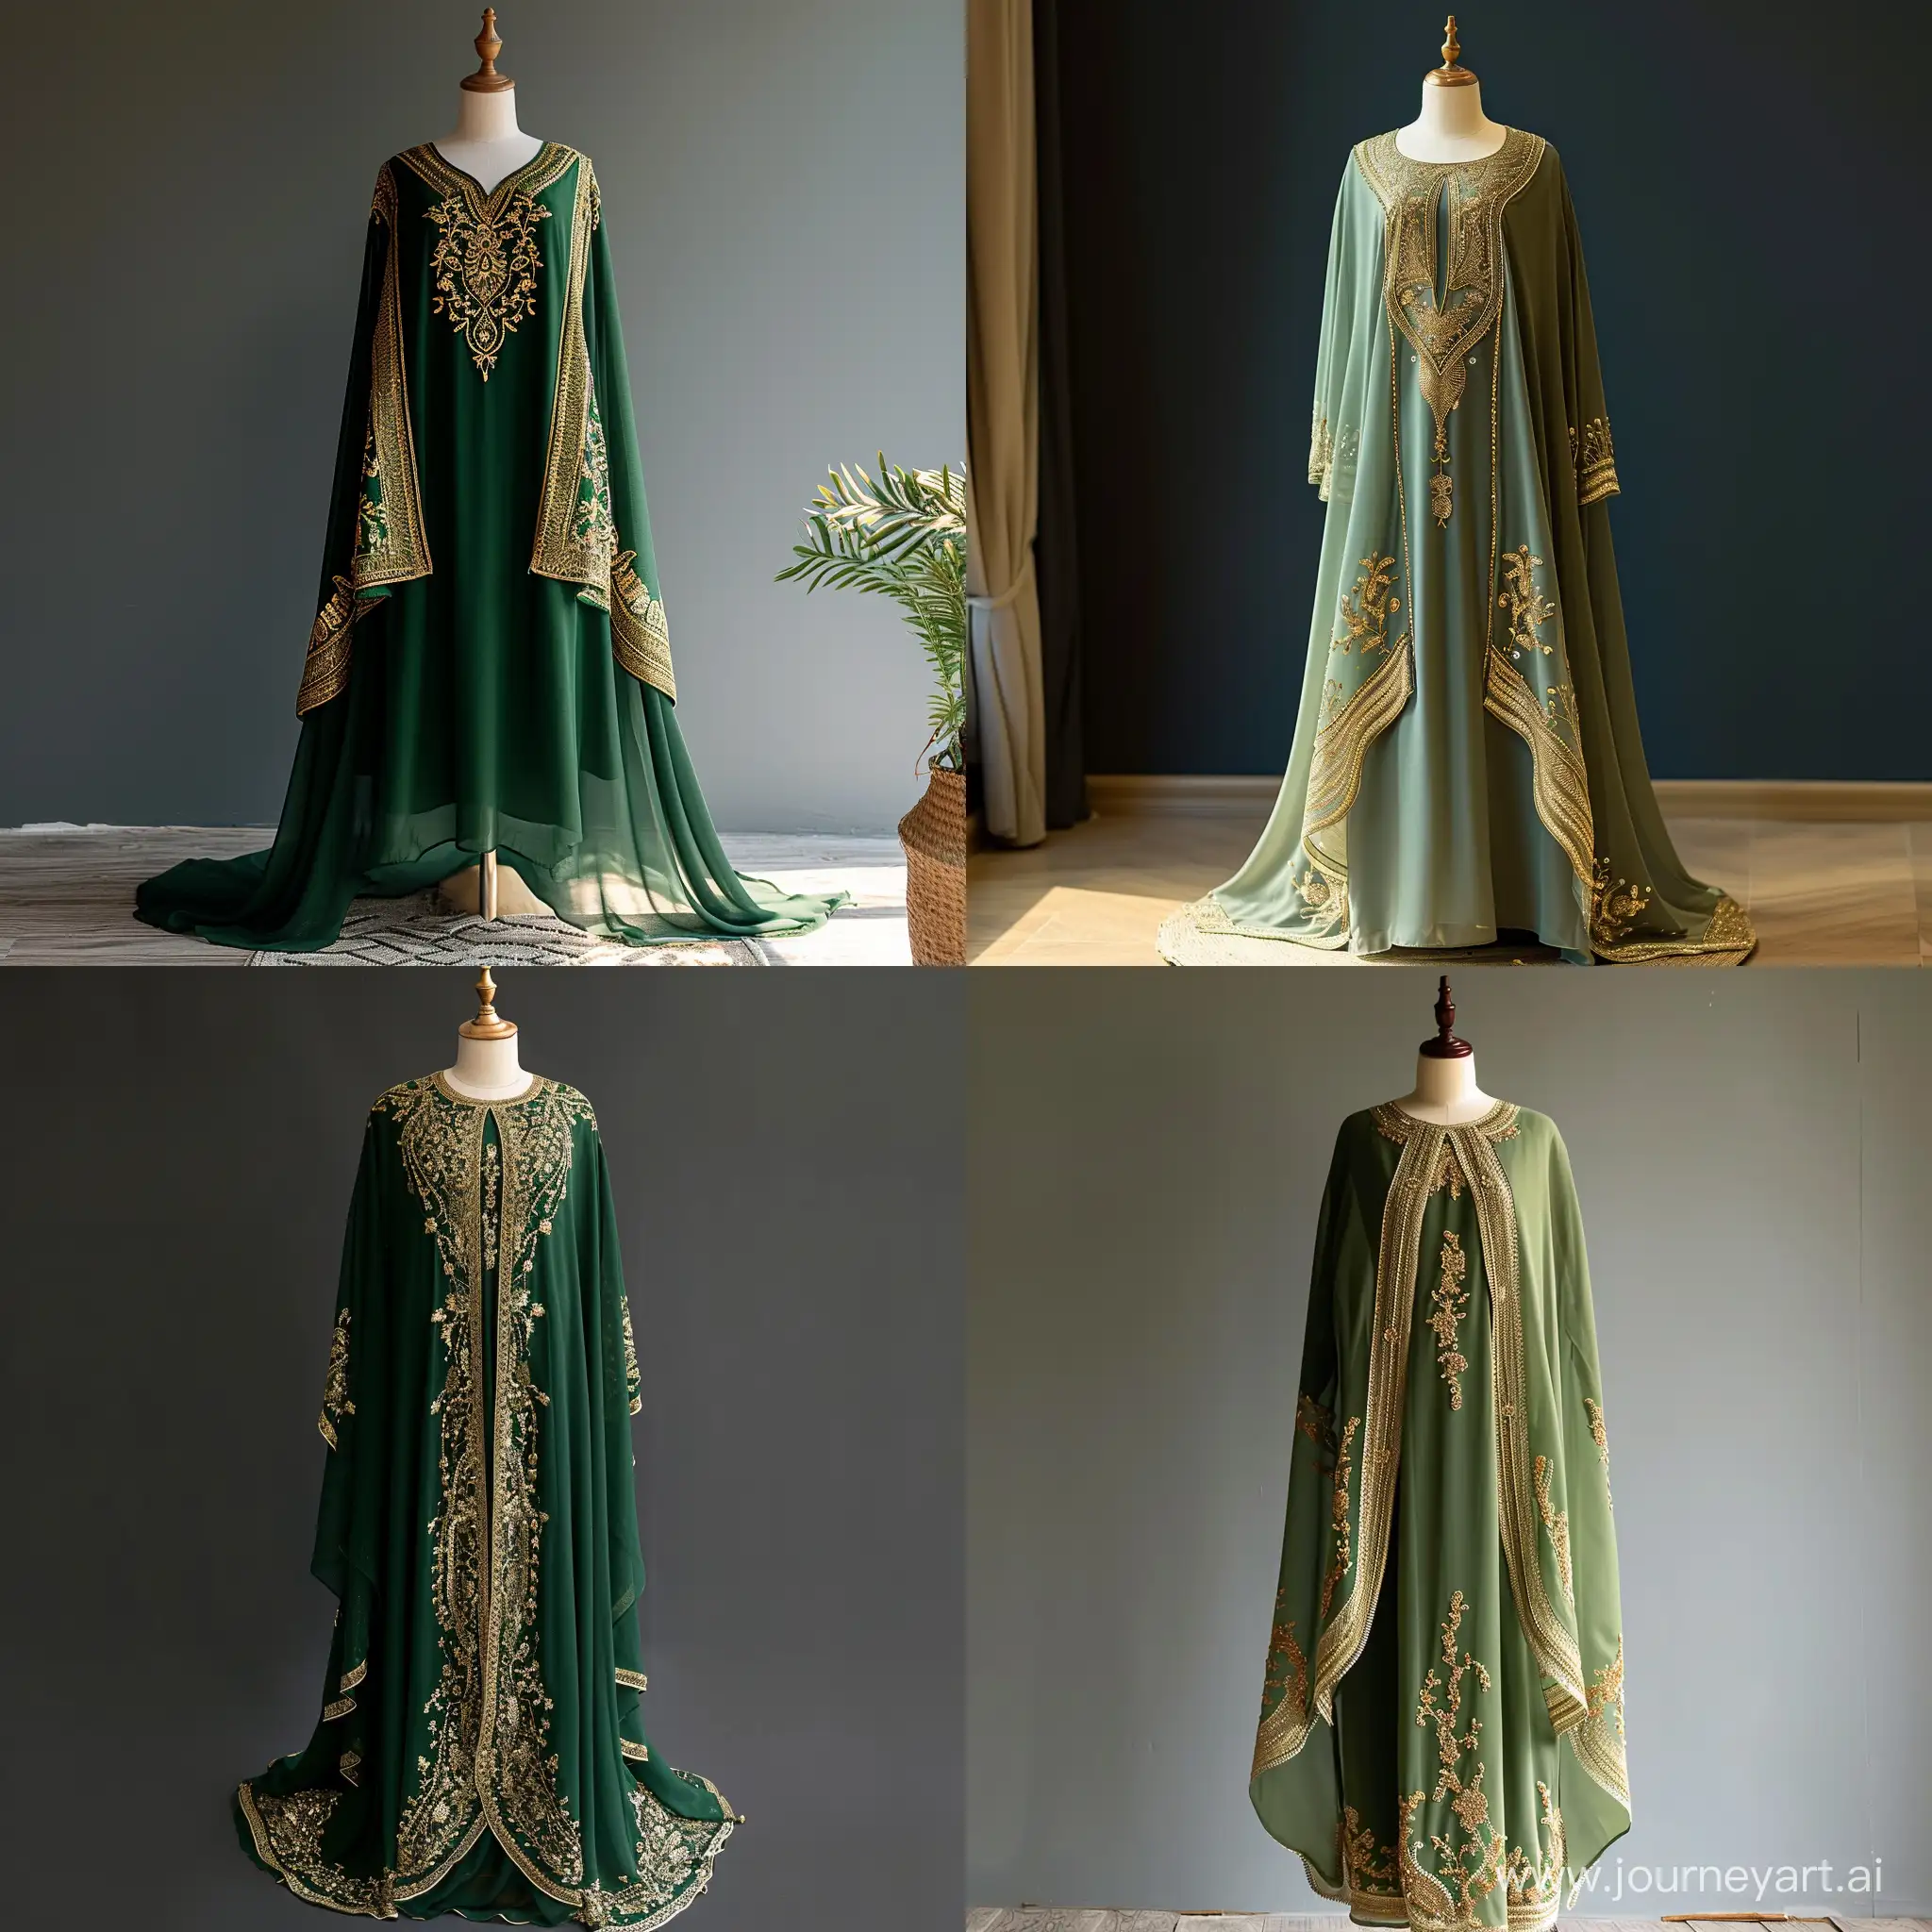 Exquisite-Green-Caftan-Dress-with-Intricate-Golden-Embroidery-on-Mannequin